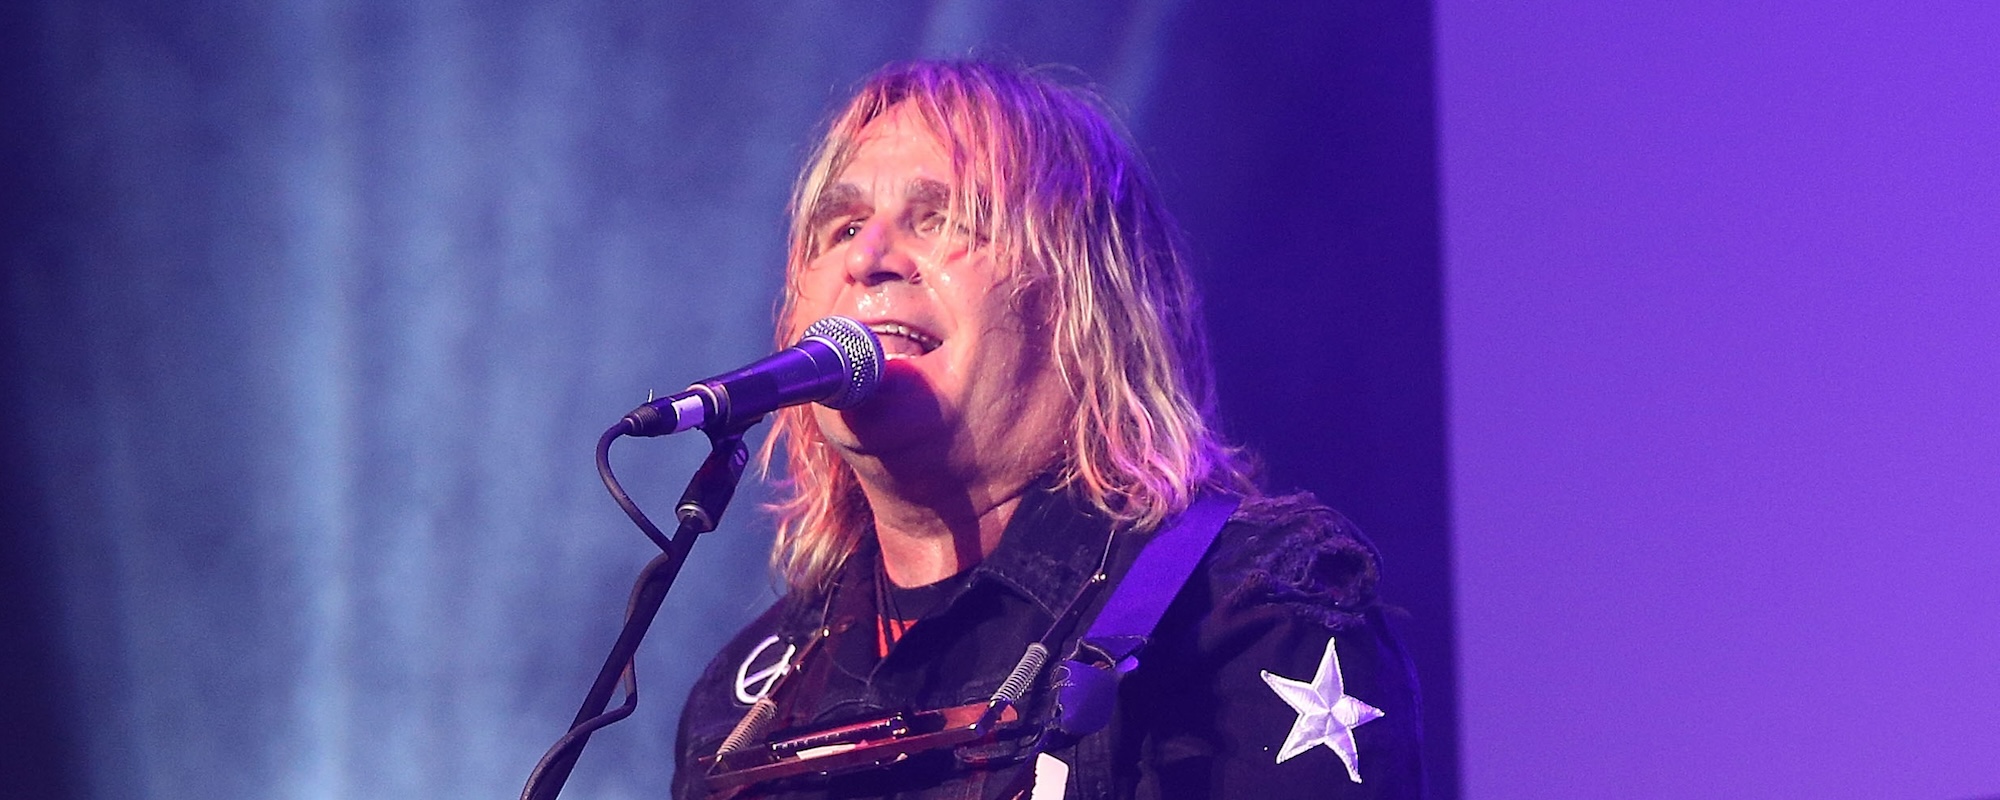 The Alarm’s Mike Peters Faces Cancer Relapse, Band Postpones U.S. Tour